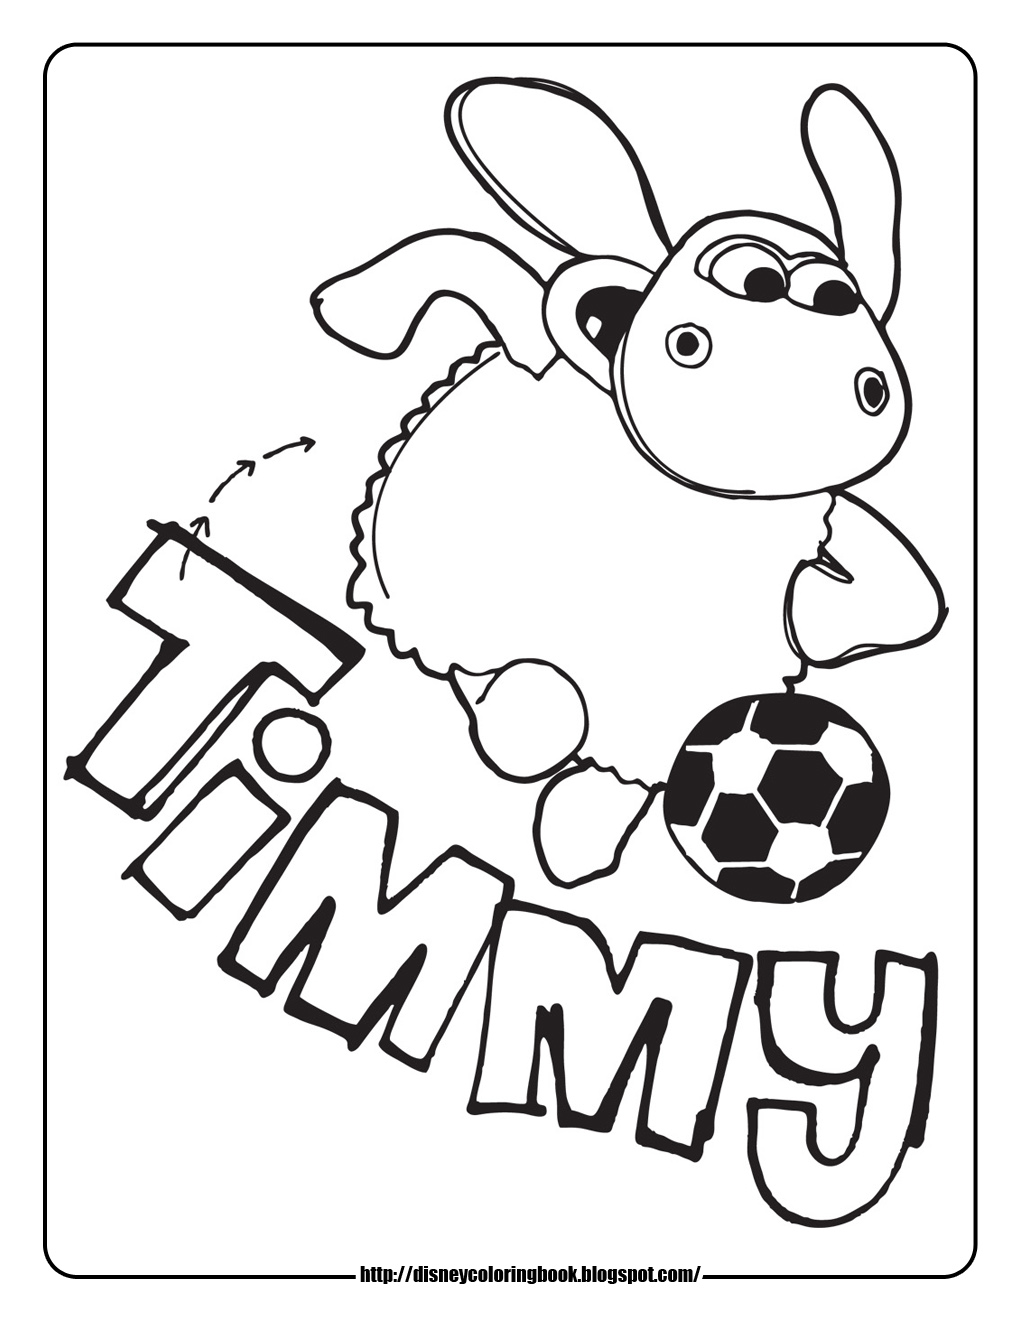 Download Timmy Time Free on Pages And Sheets For Kids  Timmy Time 1  Free Disney Coloring Sheets